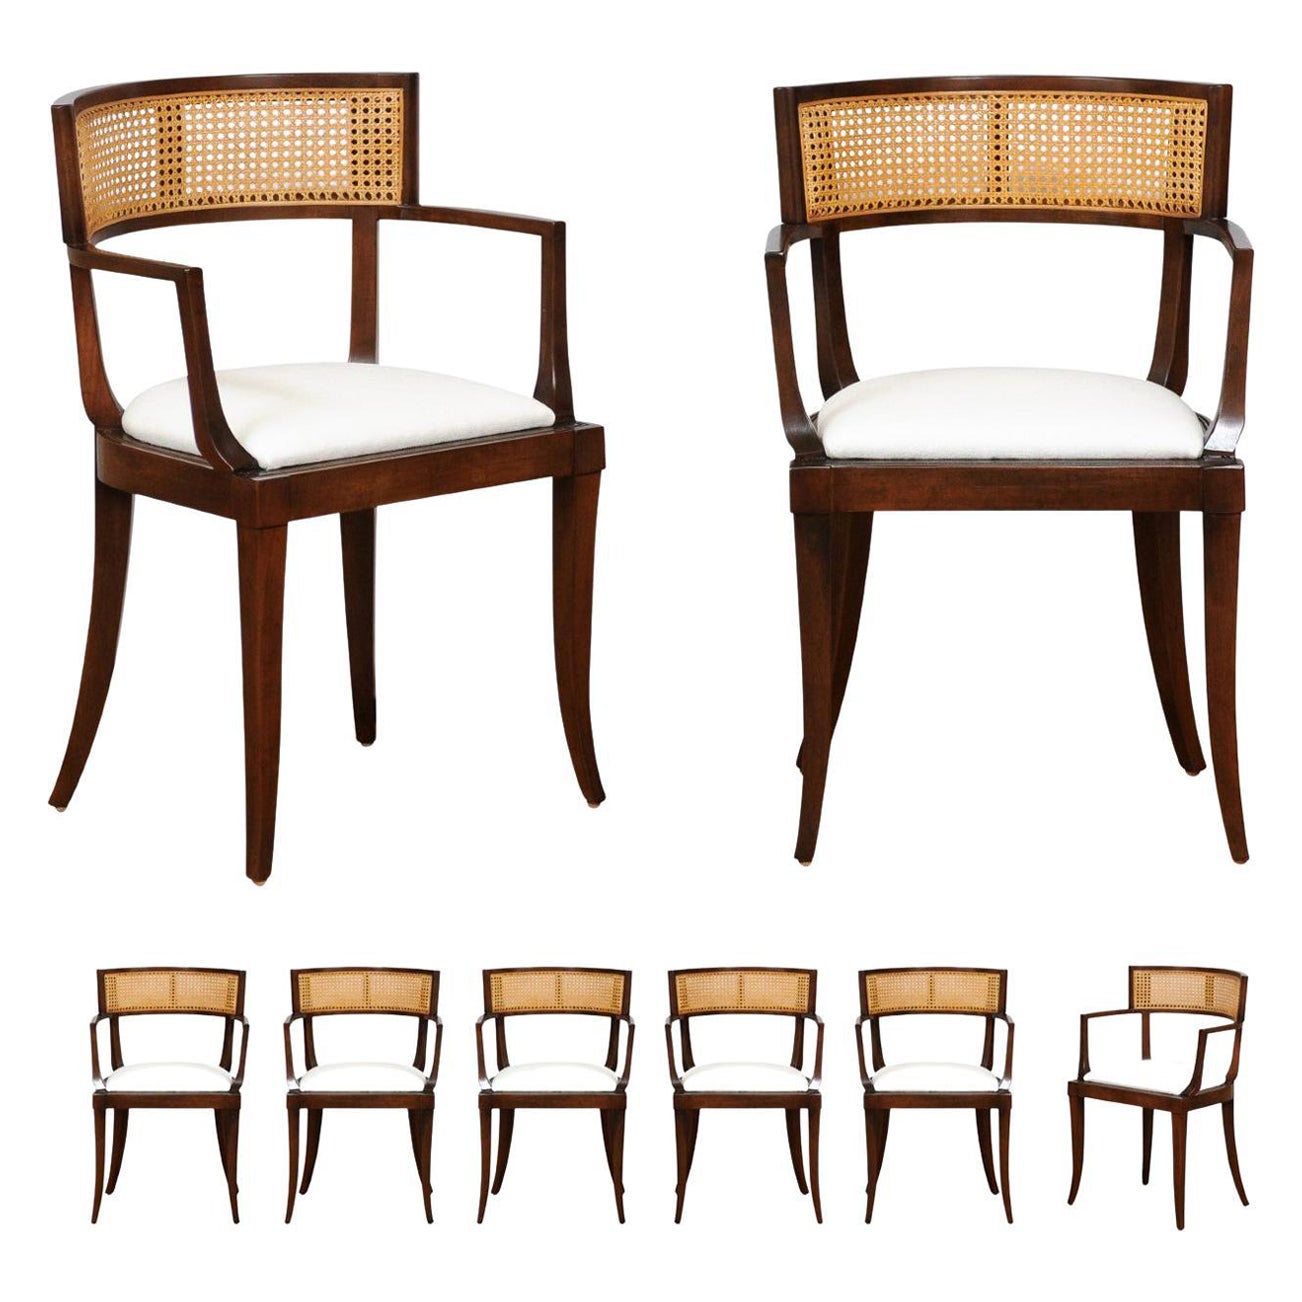 All Arm, Exquisite Set of 8 Klismos Cane Dining Chairs by Baker, circa 1958 For Sale